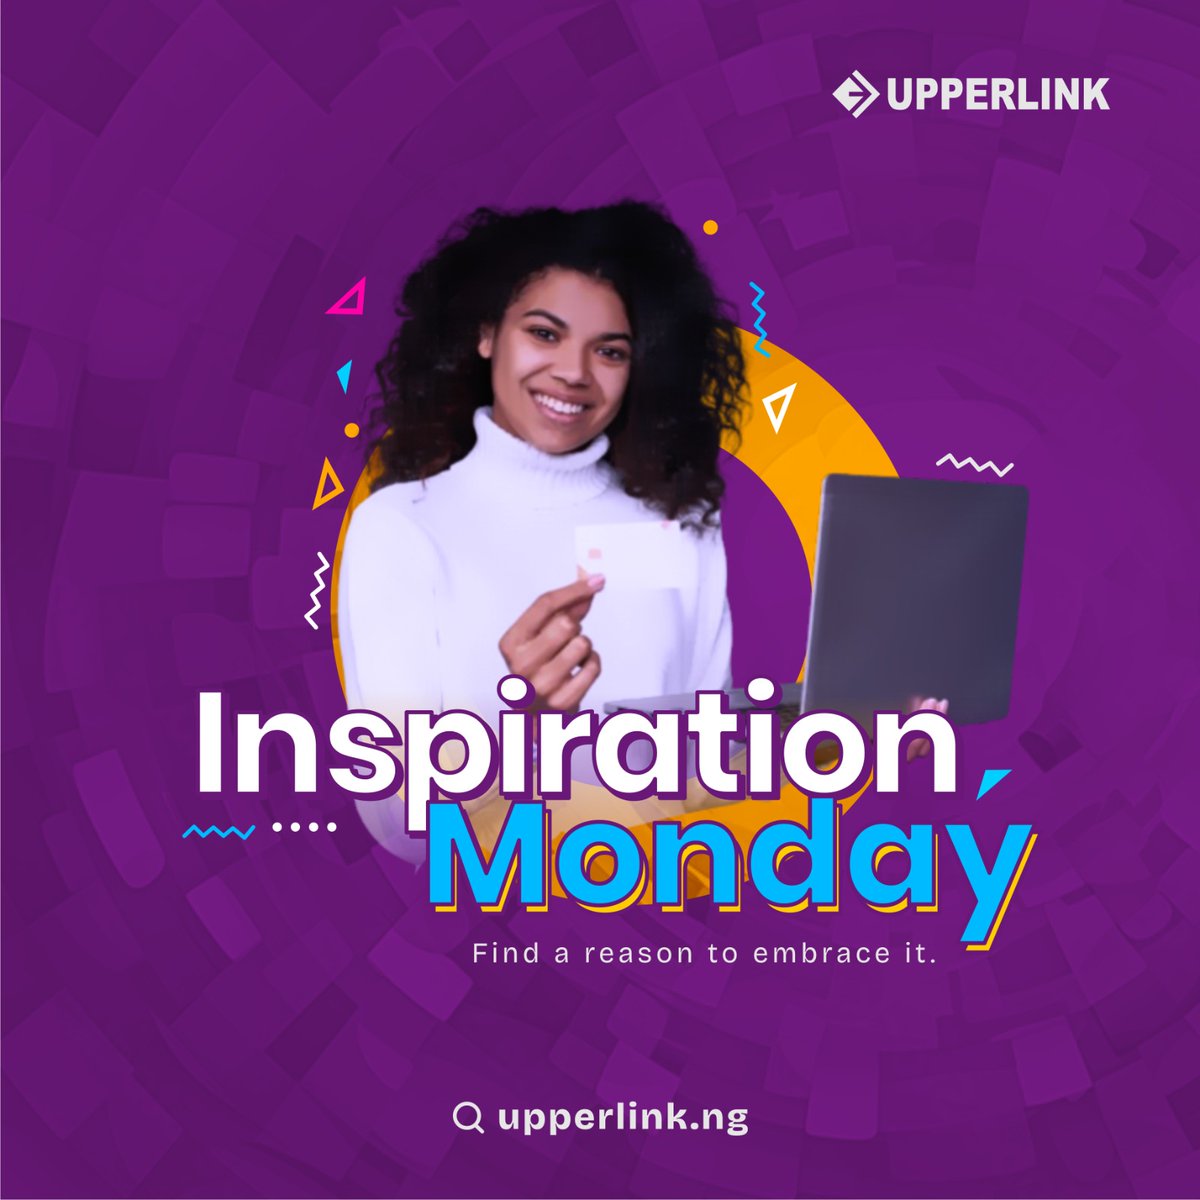 Embrace the magic of a new week. Let your positivity shine, and turn each Monday into a stepping stone towards your dreams. You've got the power to make this week extraordinary! ✨

#mondaymotivation #newweeknewgoals #upperlinklimited #webhostingservices #explorepage #explore